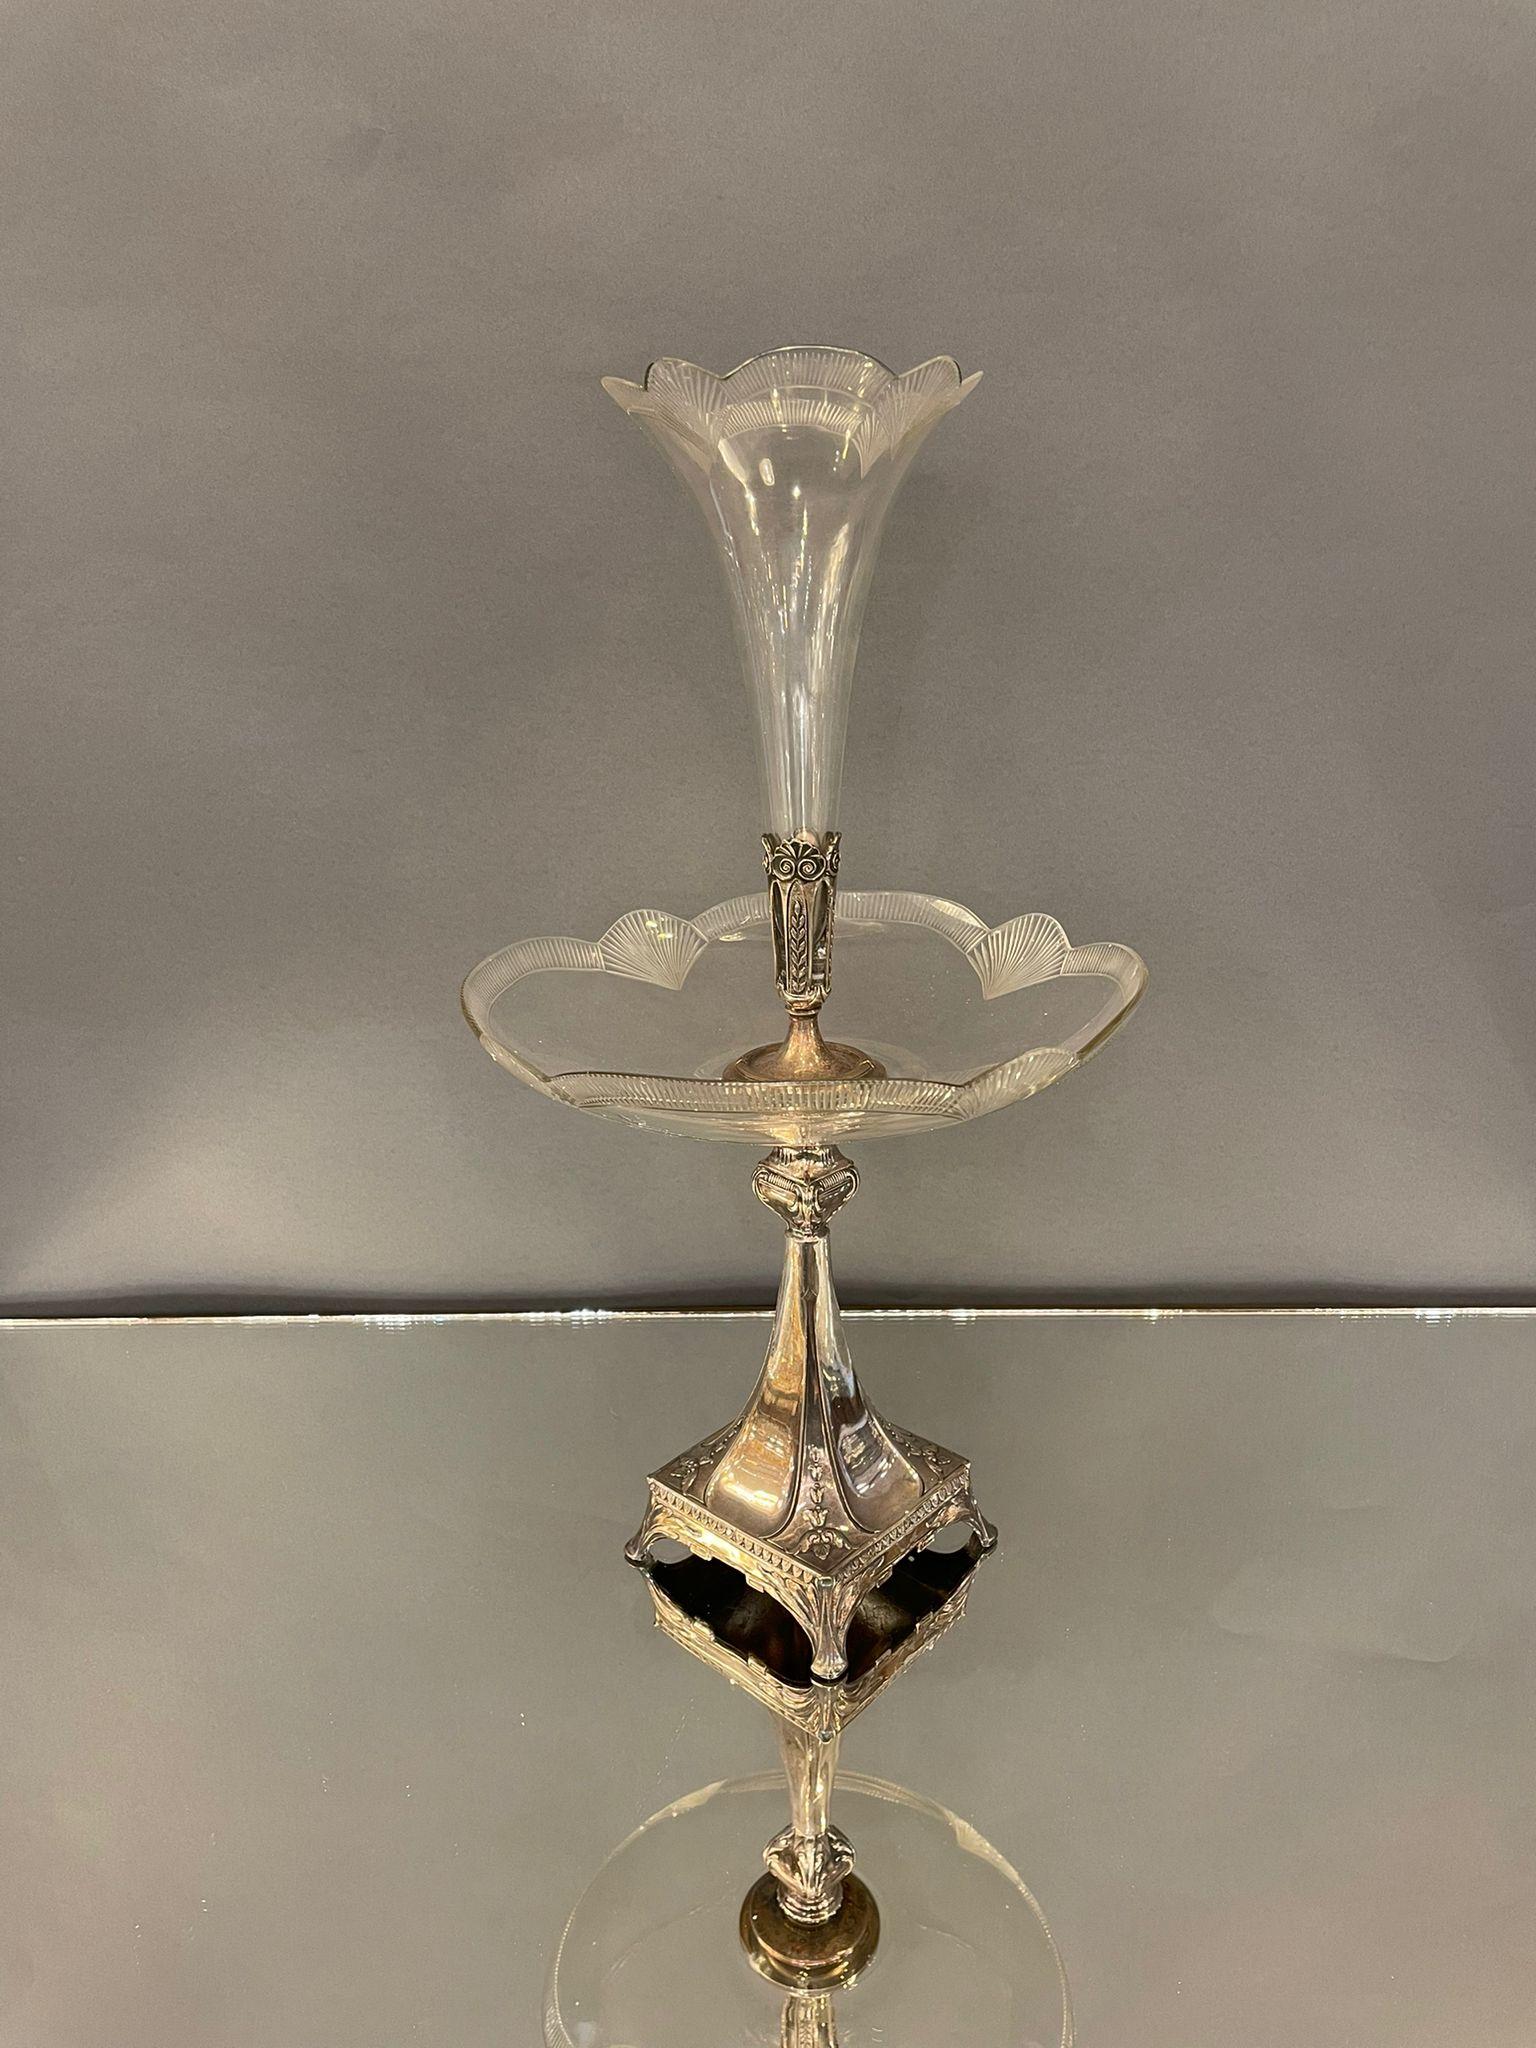 A French Art Nouveau epergne from the 19th century, with silver plate base and crystal vase. Born in France during the second half of the 19th century, this exquisite centrepiece features a Rococo inspired silver candlestick, resting on a tripartite